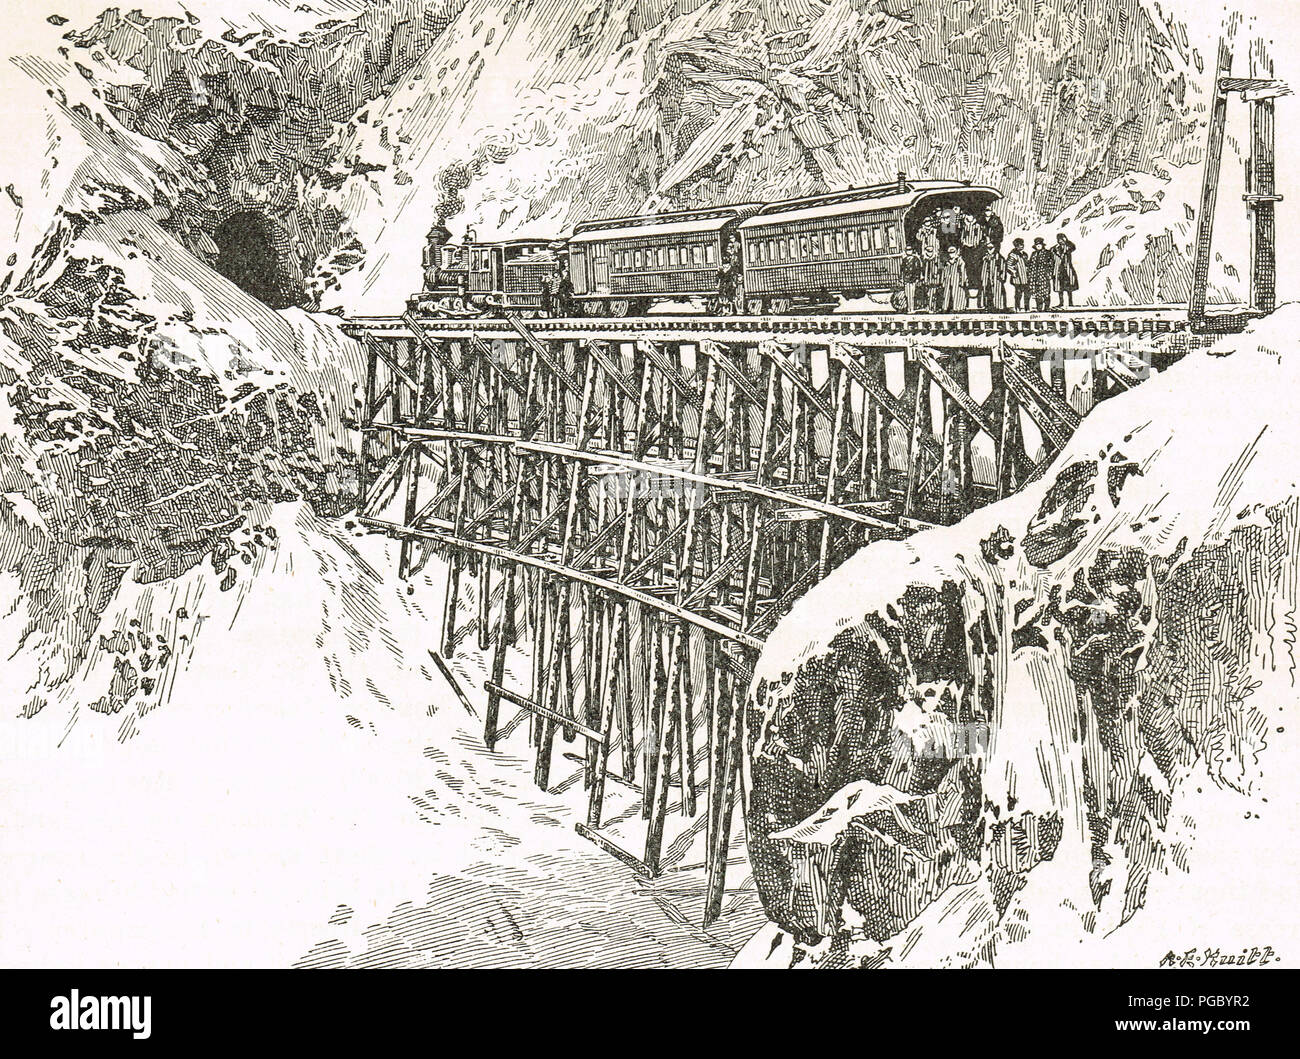 First passenger train over The White Pass and Yukon Route, in pursuit of Gold, Klondike Gold Rush Stock Photo